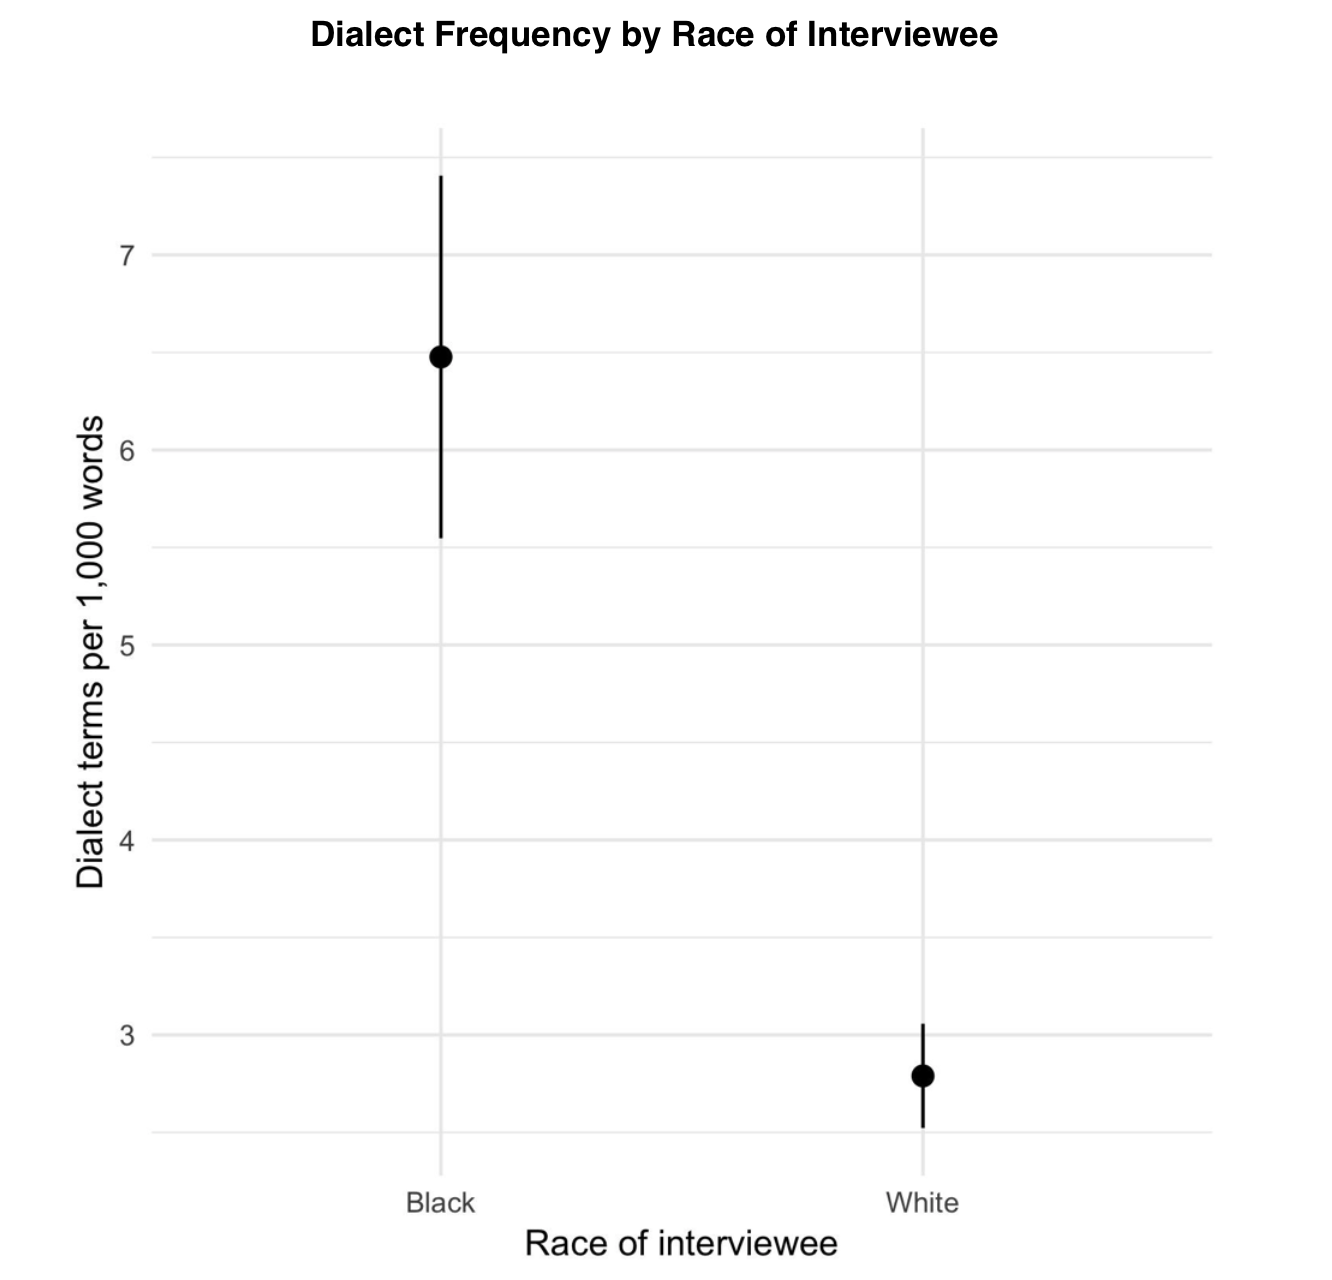 Graph showing the dialect frequency for a black interviewee ranged from approximately five and a half to seven and a half occurrences per one thousand words, while the dialect frequency for a white interviewee ranged from approximately two and a half to thee per one thousand words.